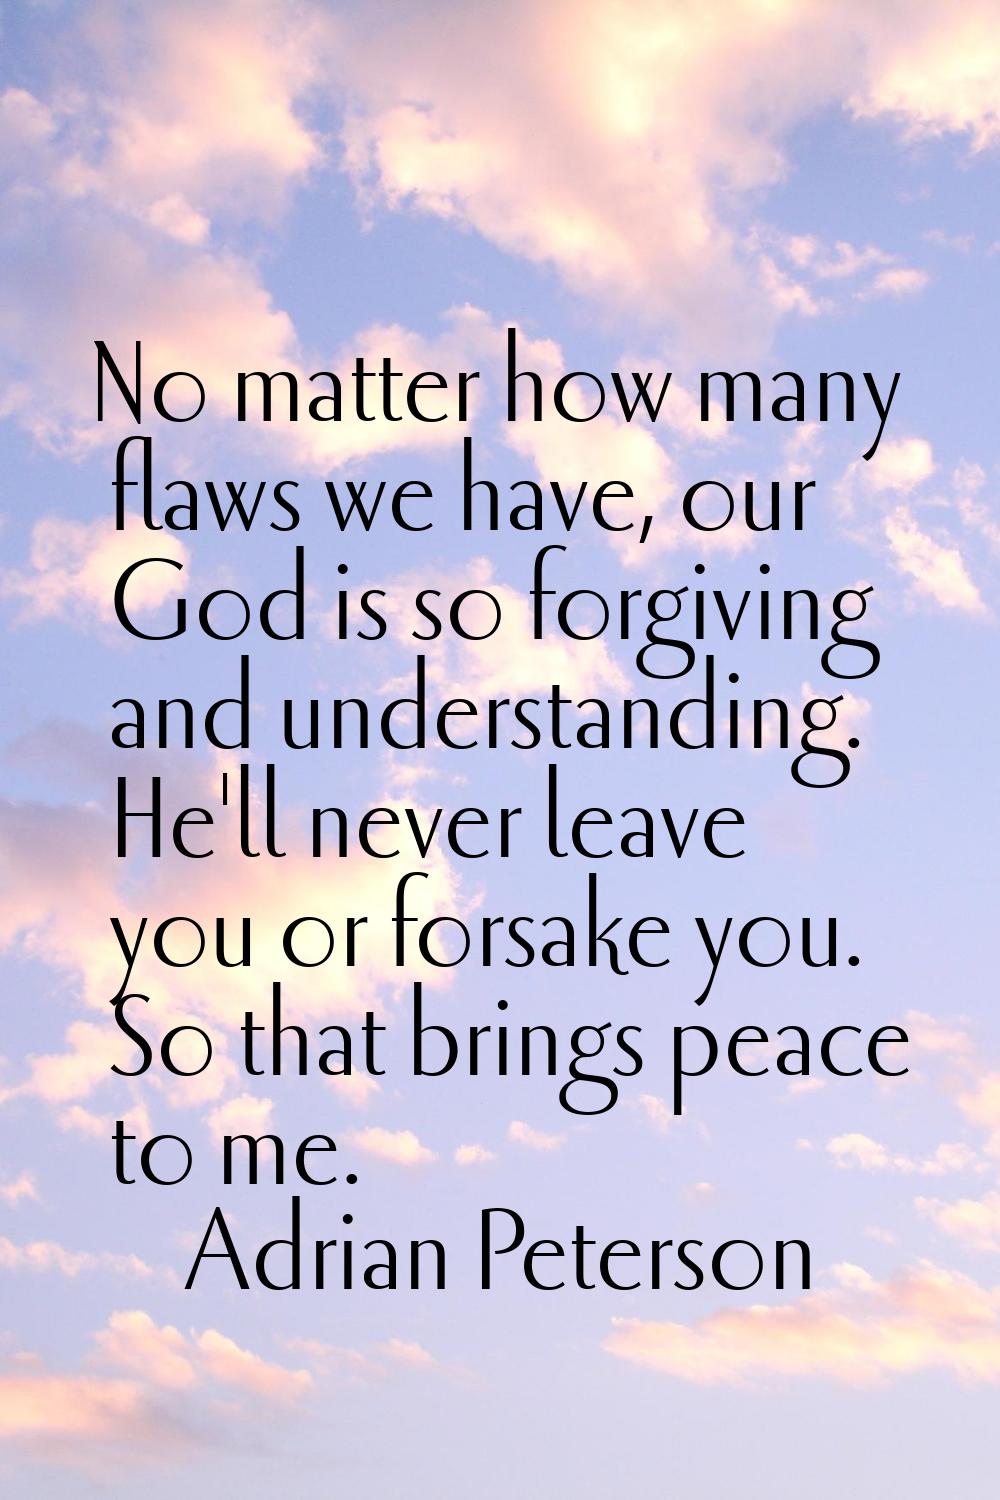 No matter how many flaws we have, our God is so forgiving and understanding. He'll never leave you 